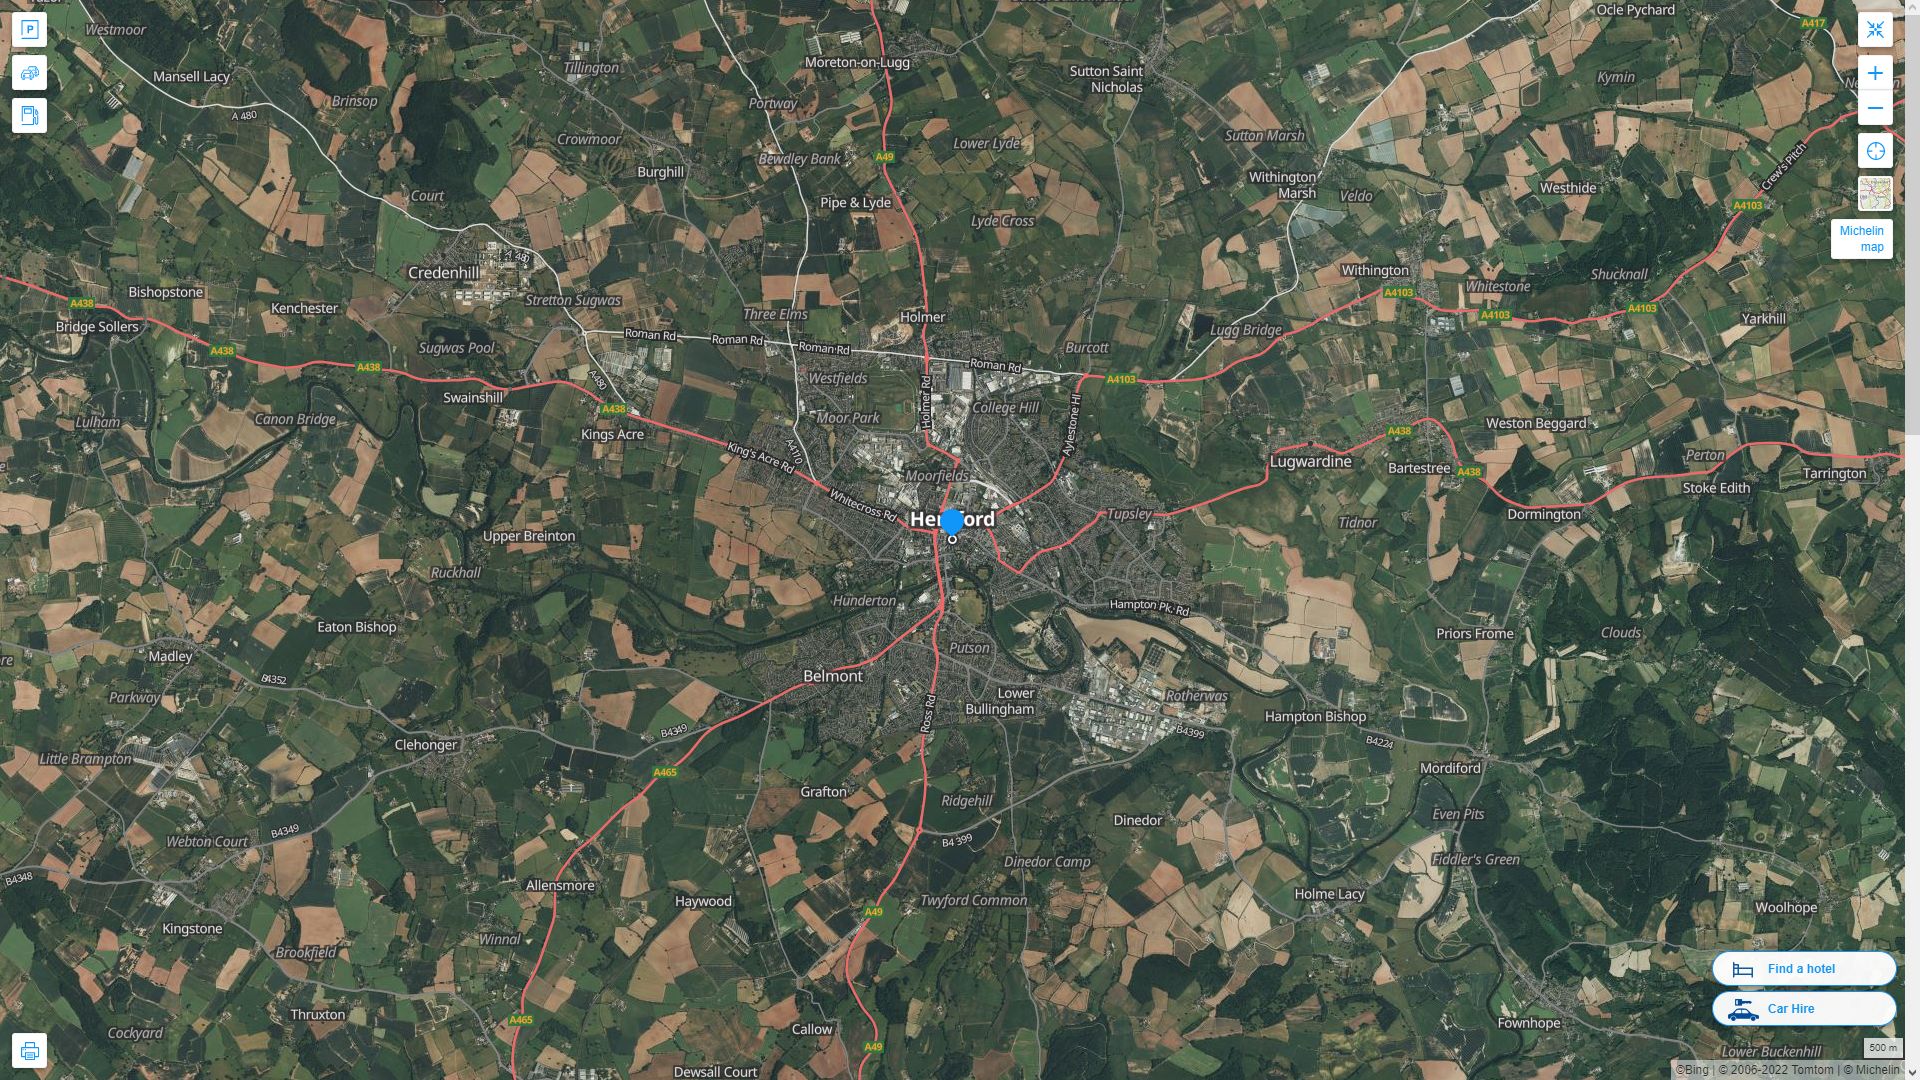 Hereford Highway and Road Map with Satellite View